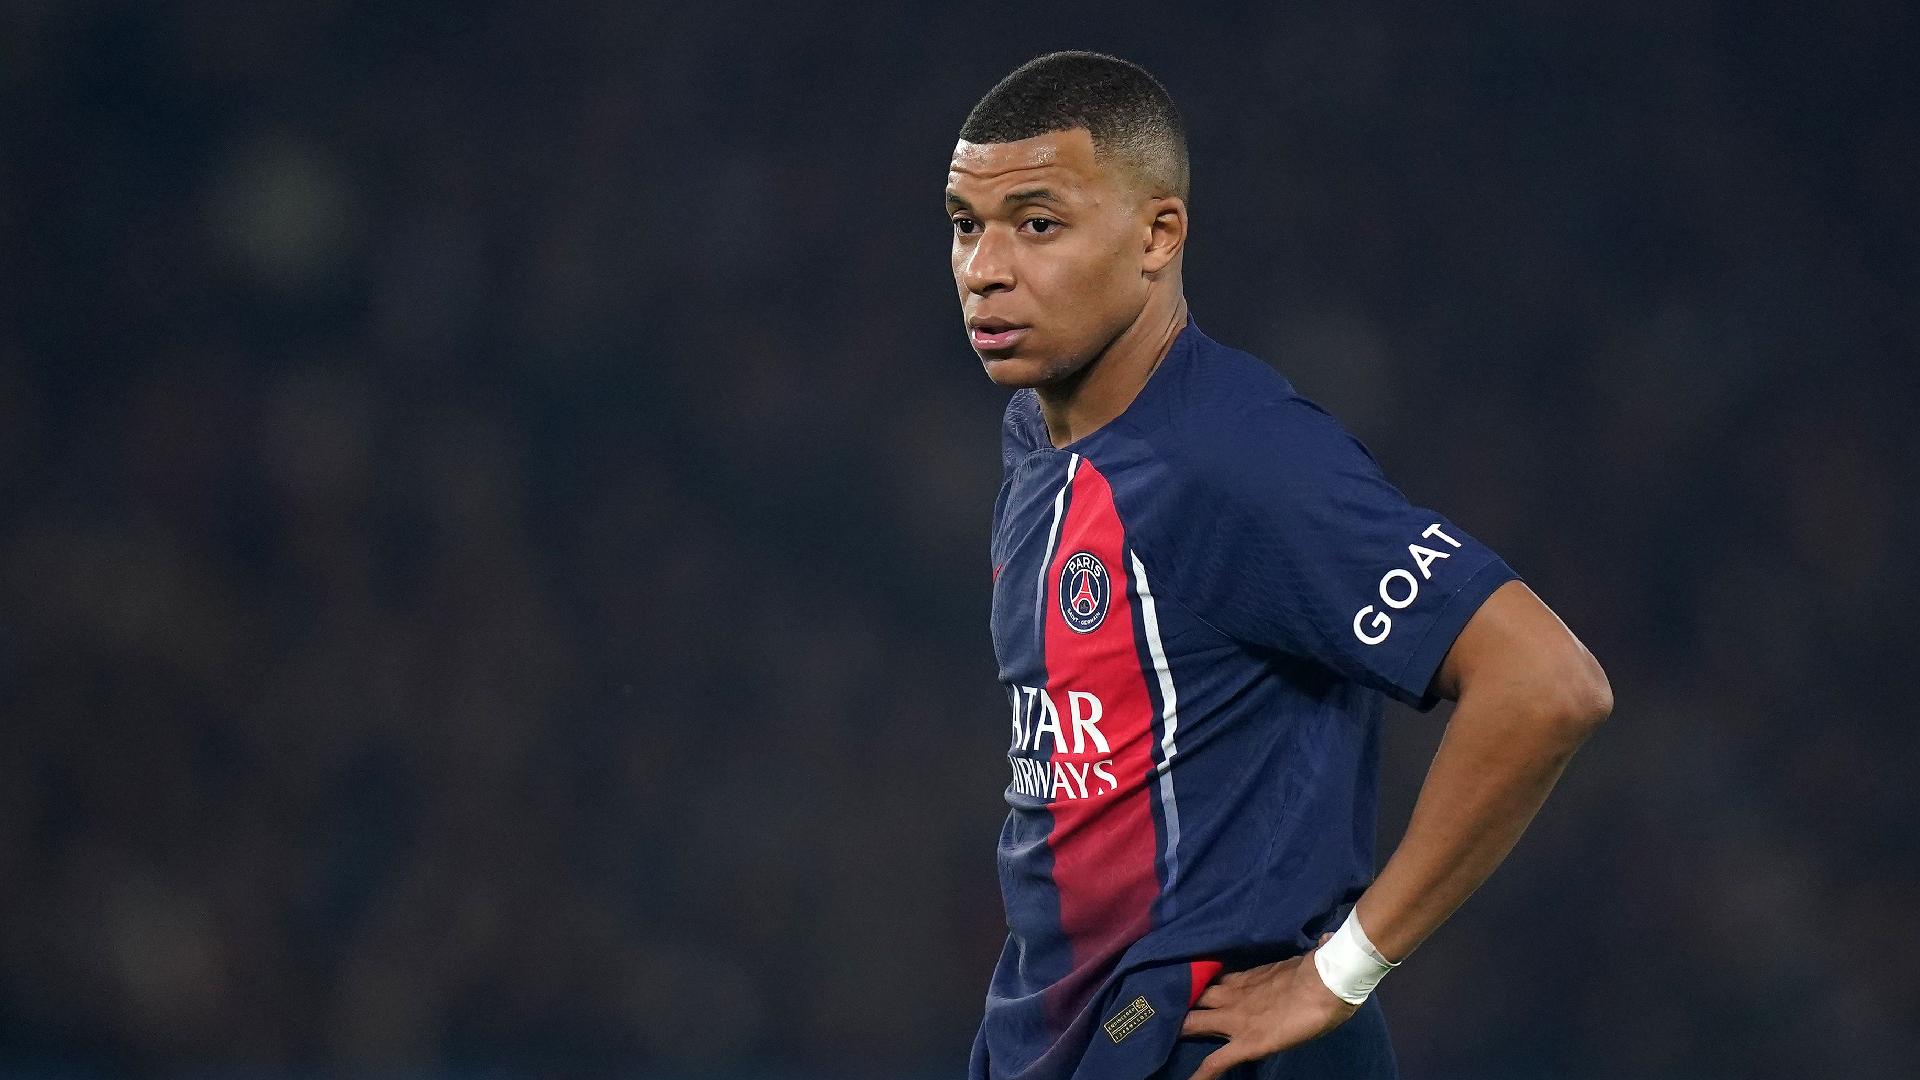 mikel-arteta-confirms-arsenal-is-in-conversation-to-sign-kylian-mbappe